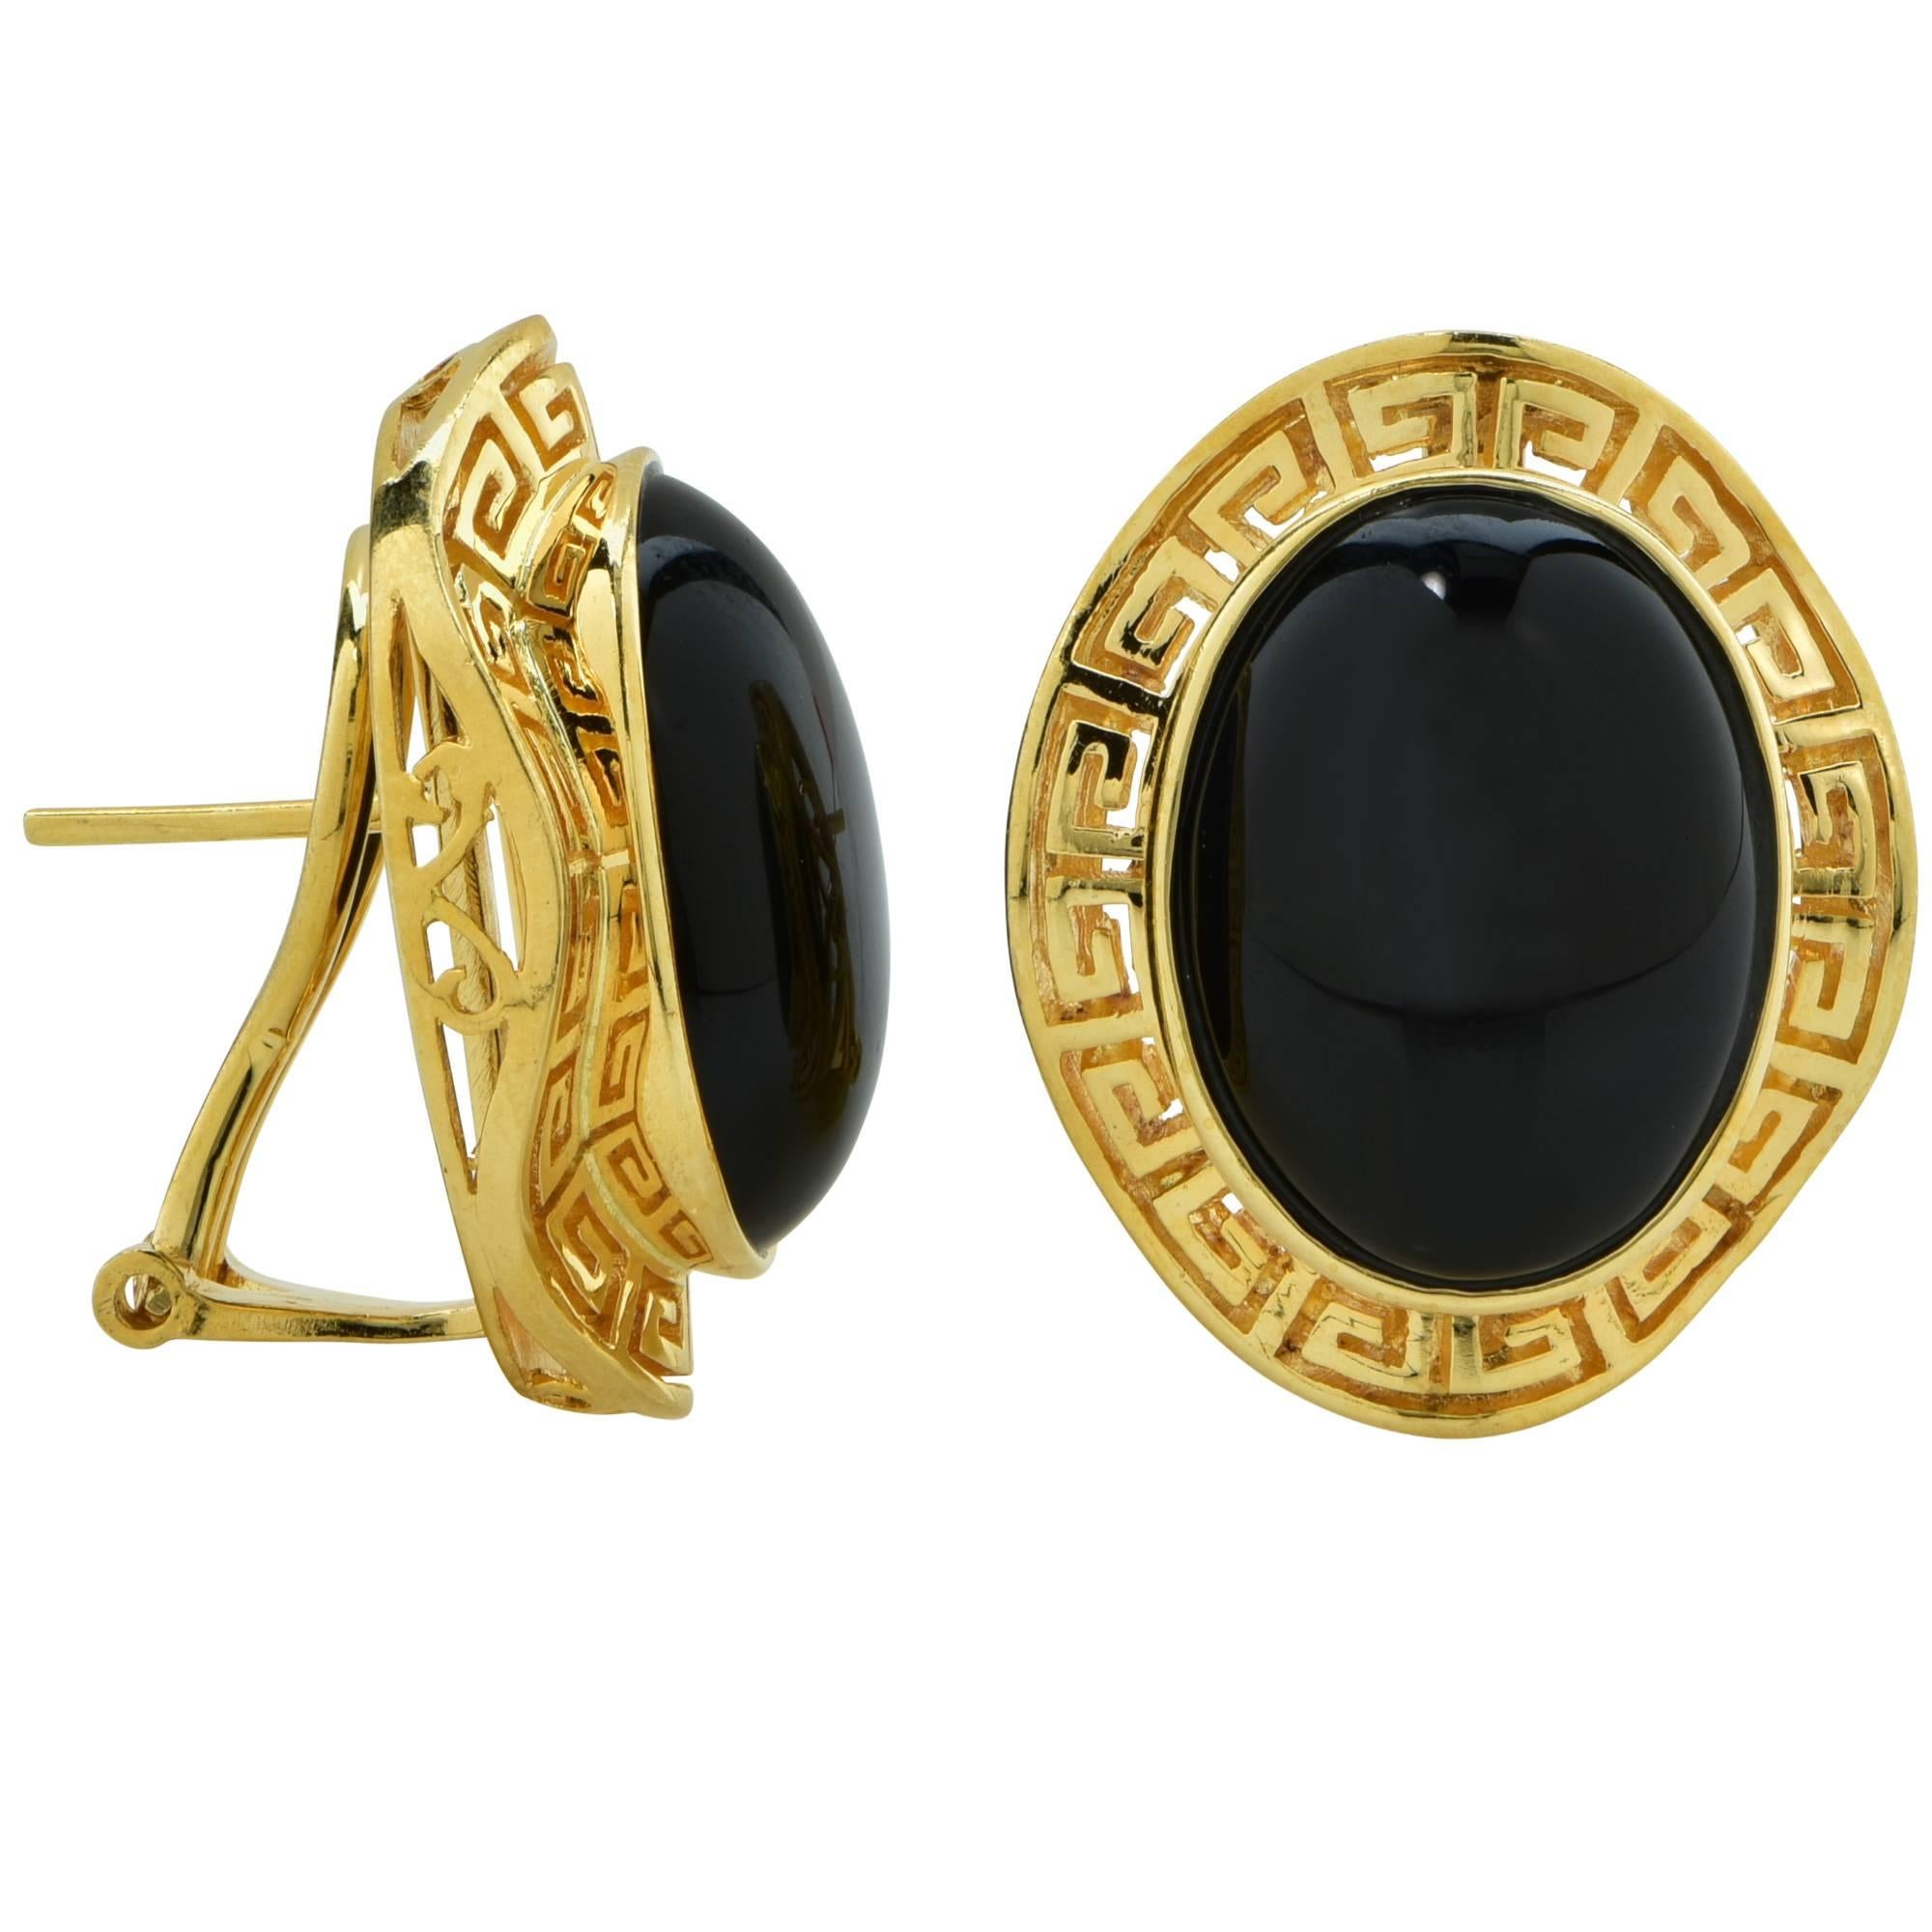 18k yellow gold earrings featuring 2 onyx cabochons.

The earrings measure .97 inch in height by .80 inch in width by .40 inch in depth.
They are stamped and tested as 18k gold.
The metal weight is 18.03 grams.

These onyx earrings are